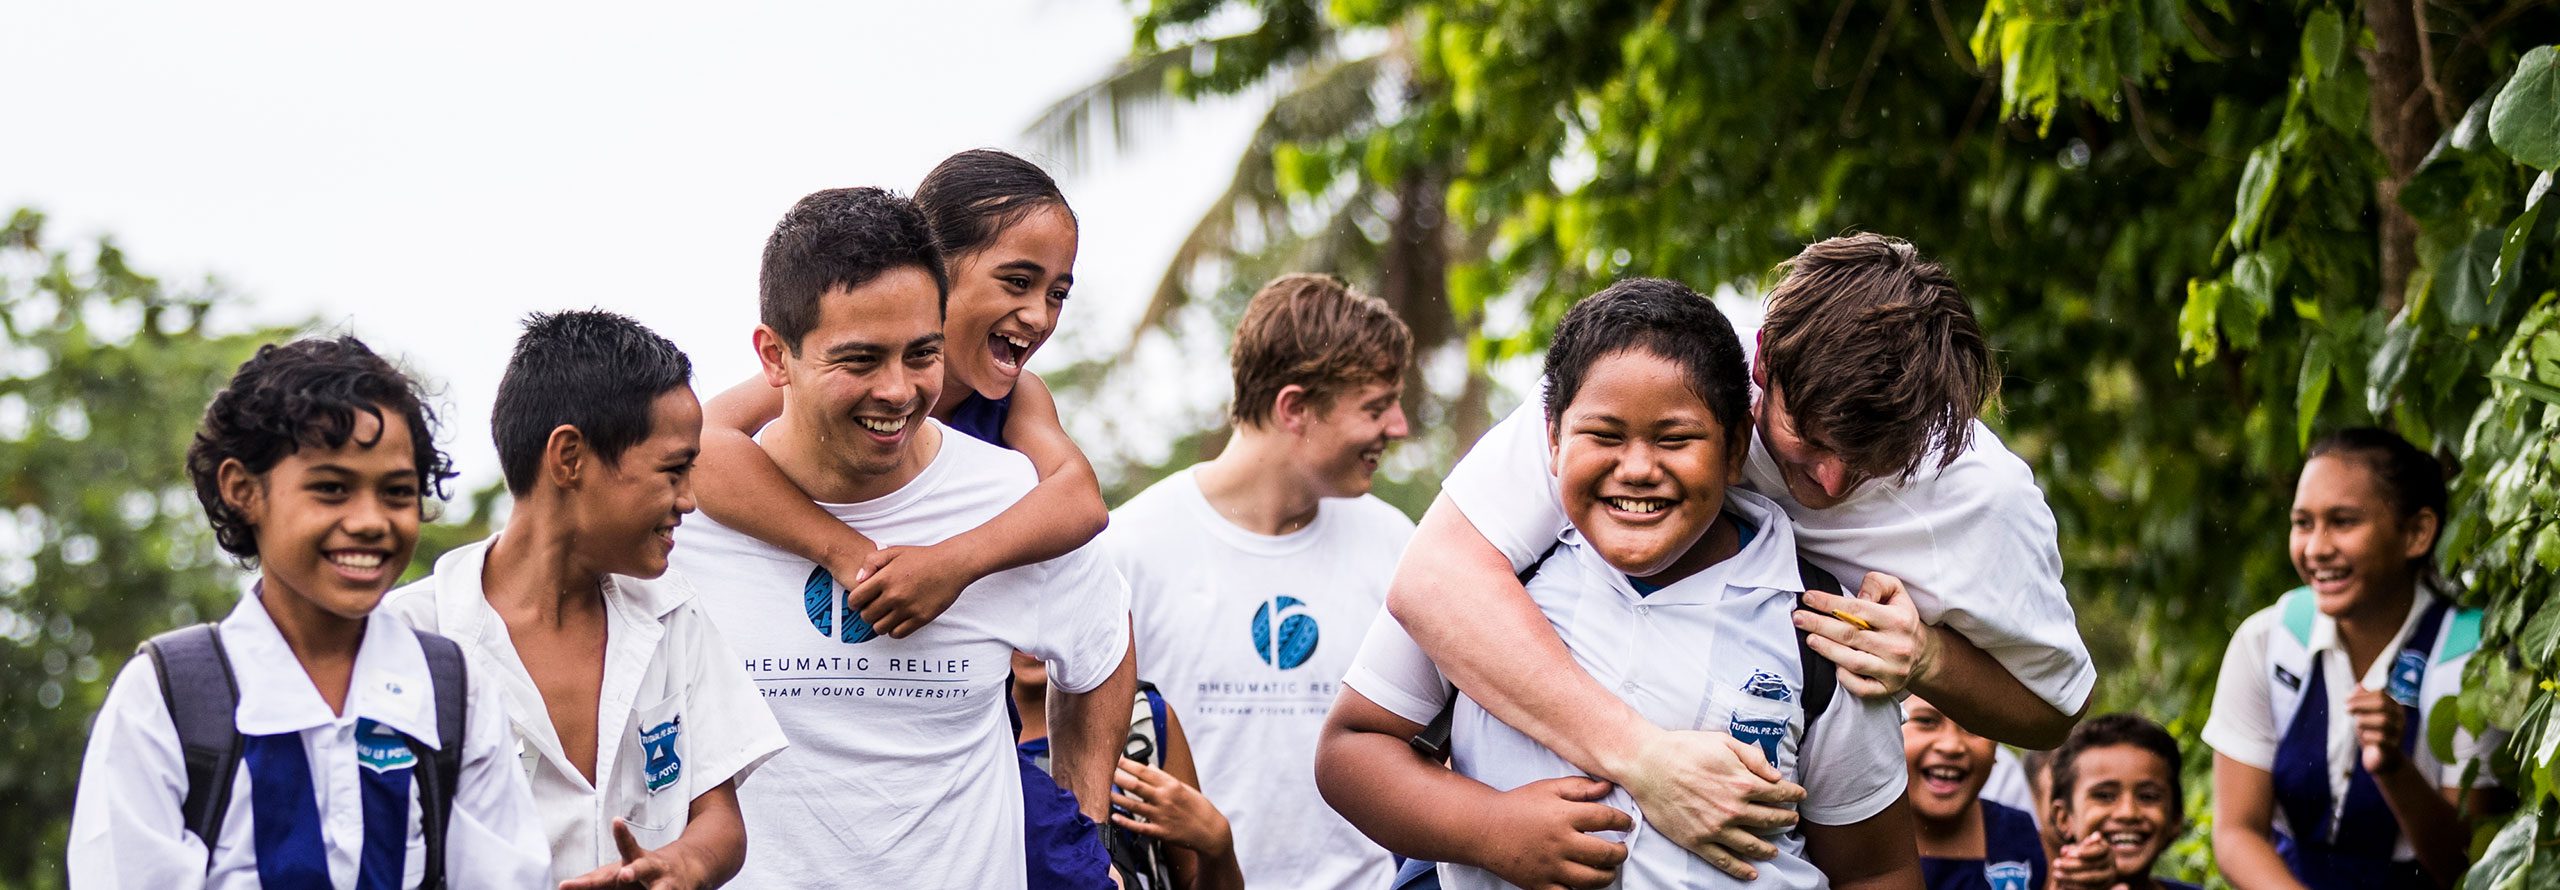 Young Samoan students interact and have a good time with a group of the BYU's relief team as they walk. Palm trees are in the background.